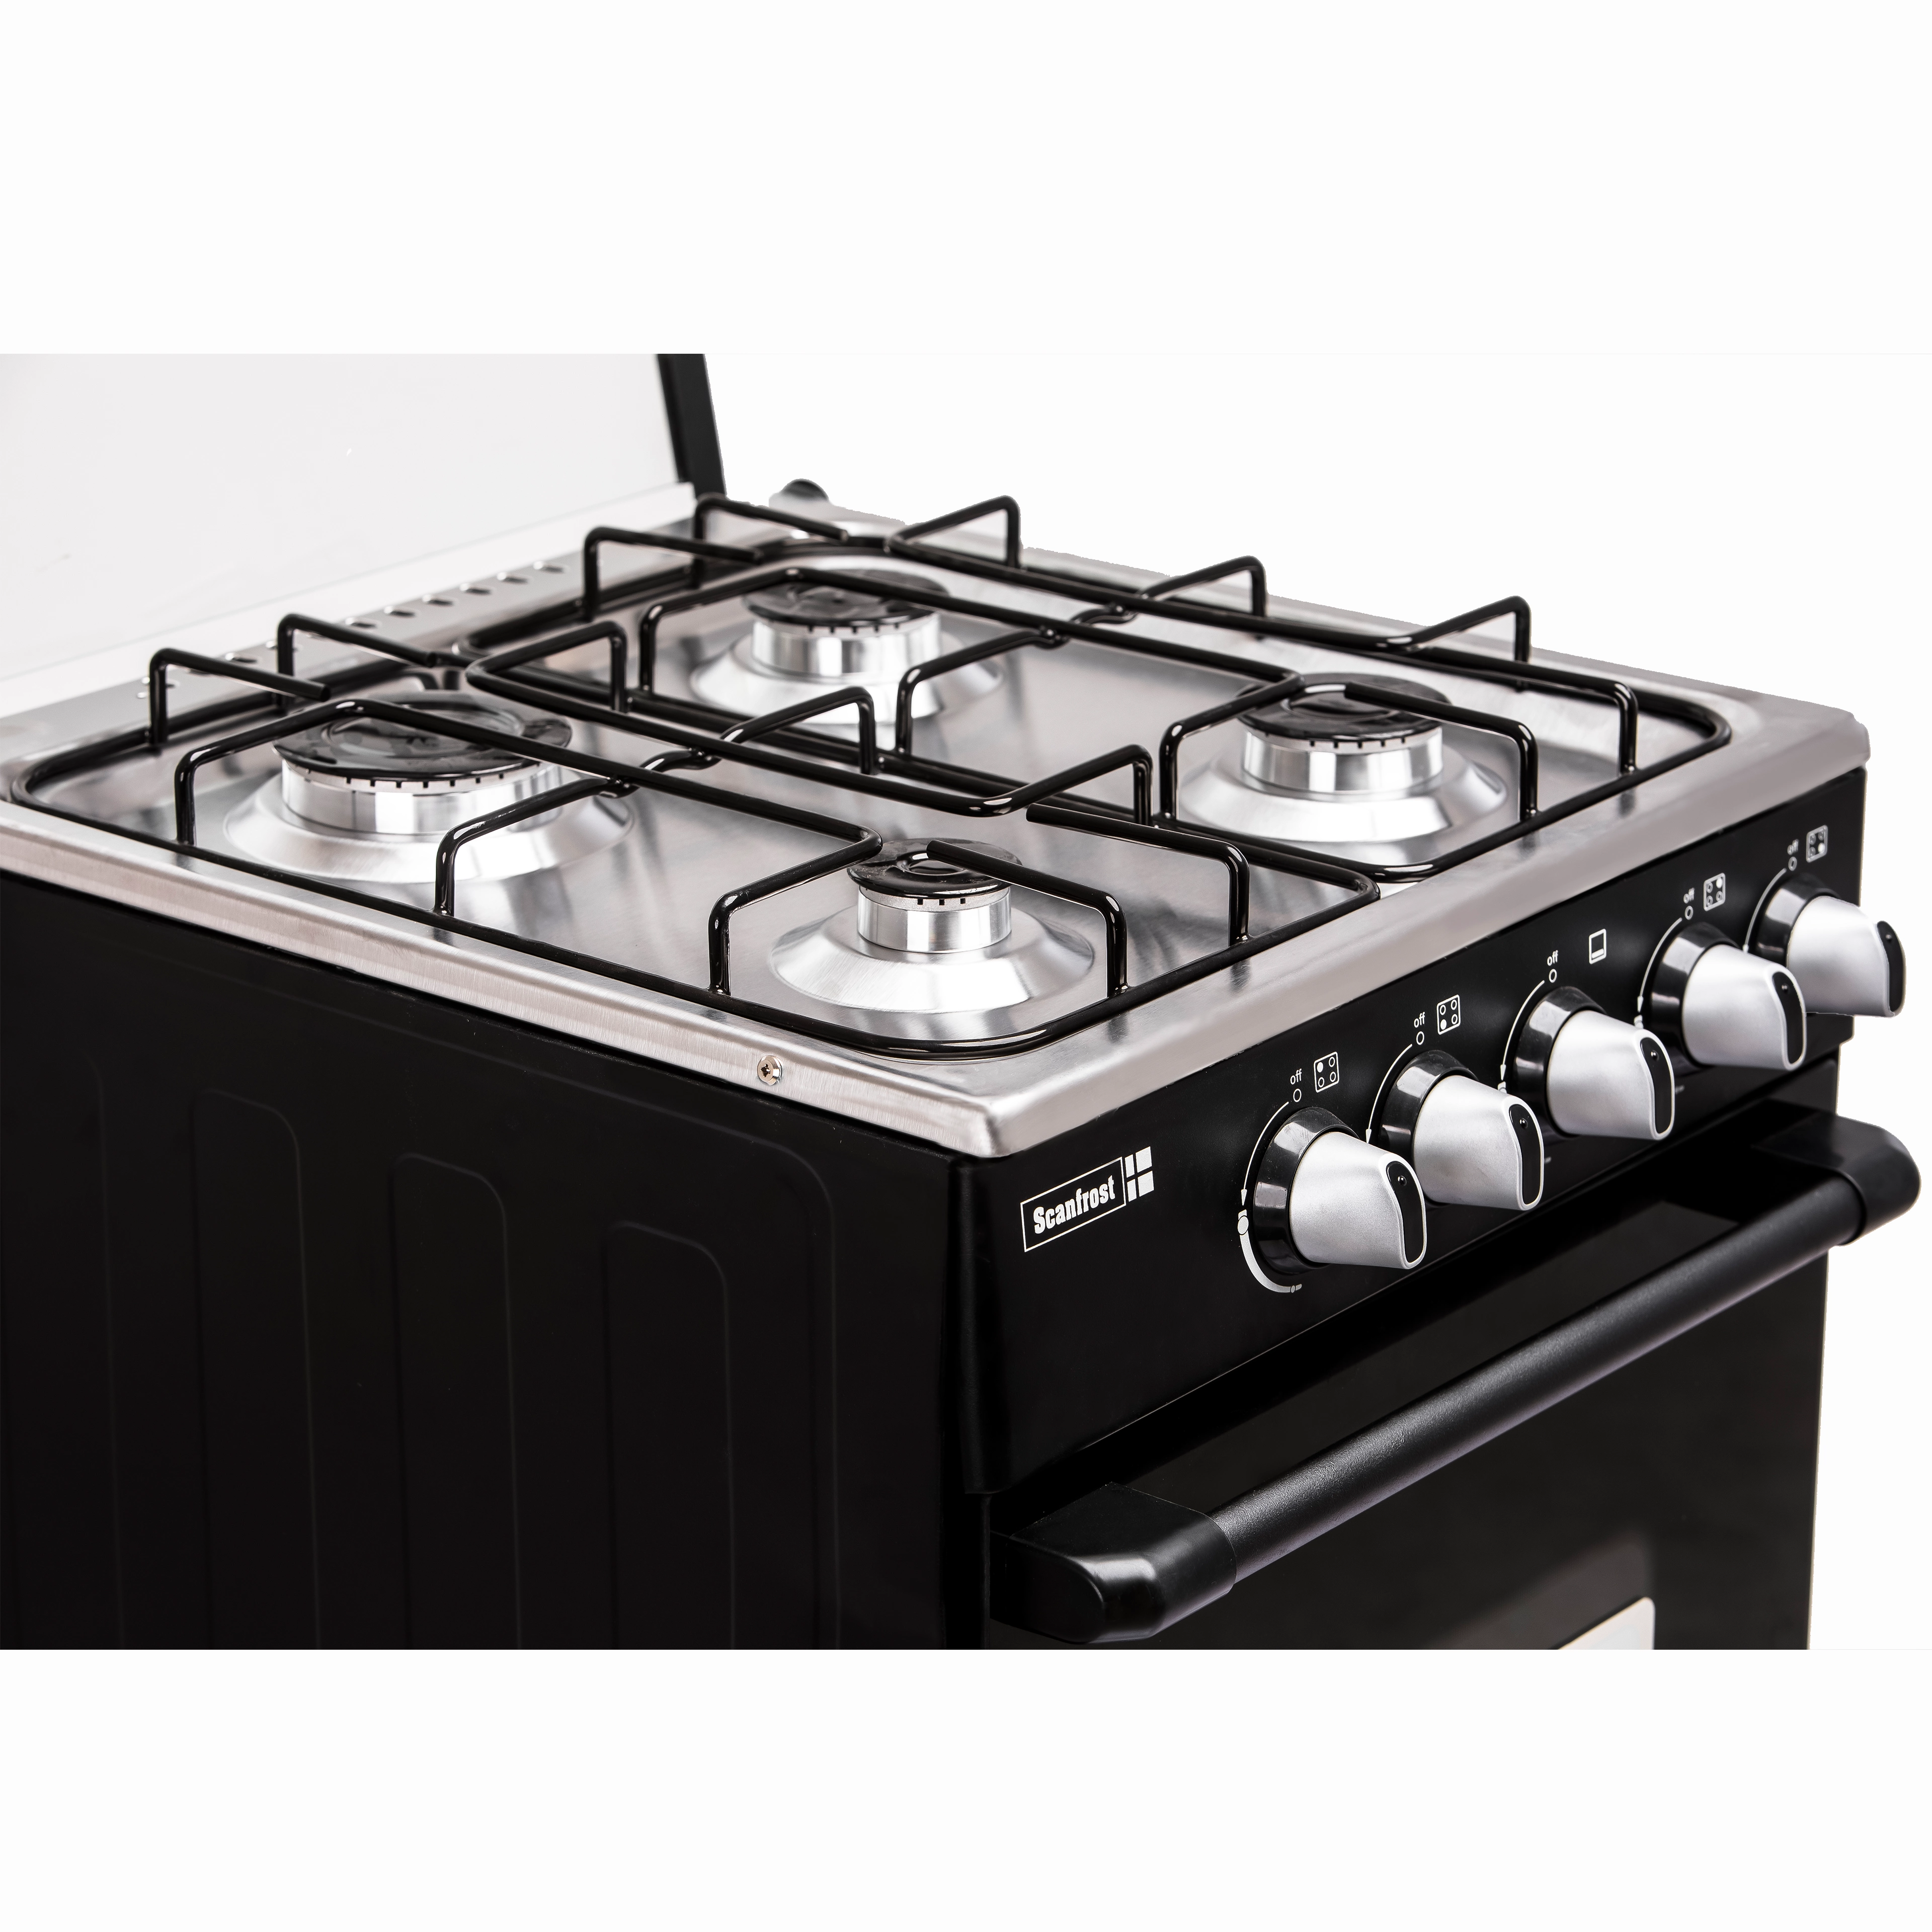 photo of SCANFROST GAS COOKER 50X55 4 BURNERS SFC5402B BLACK 